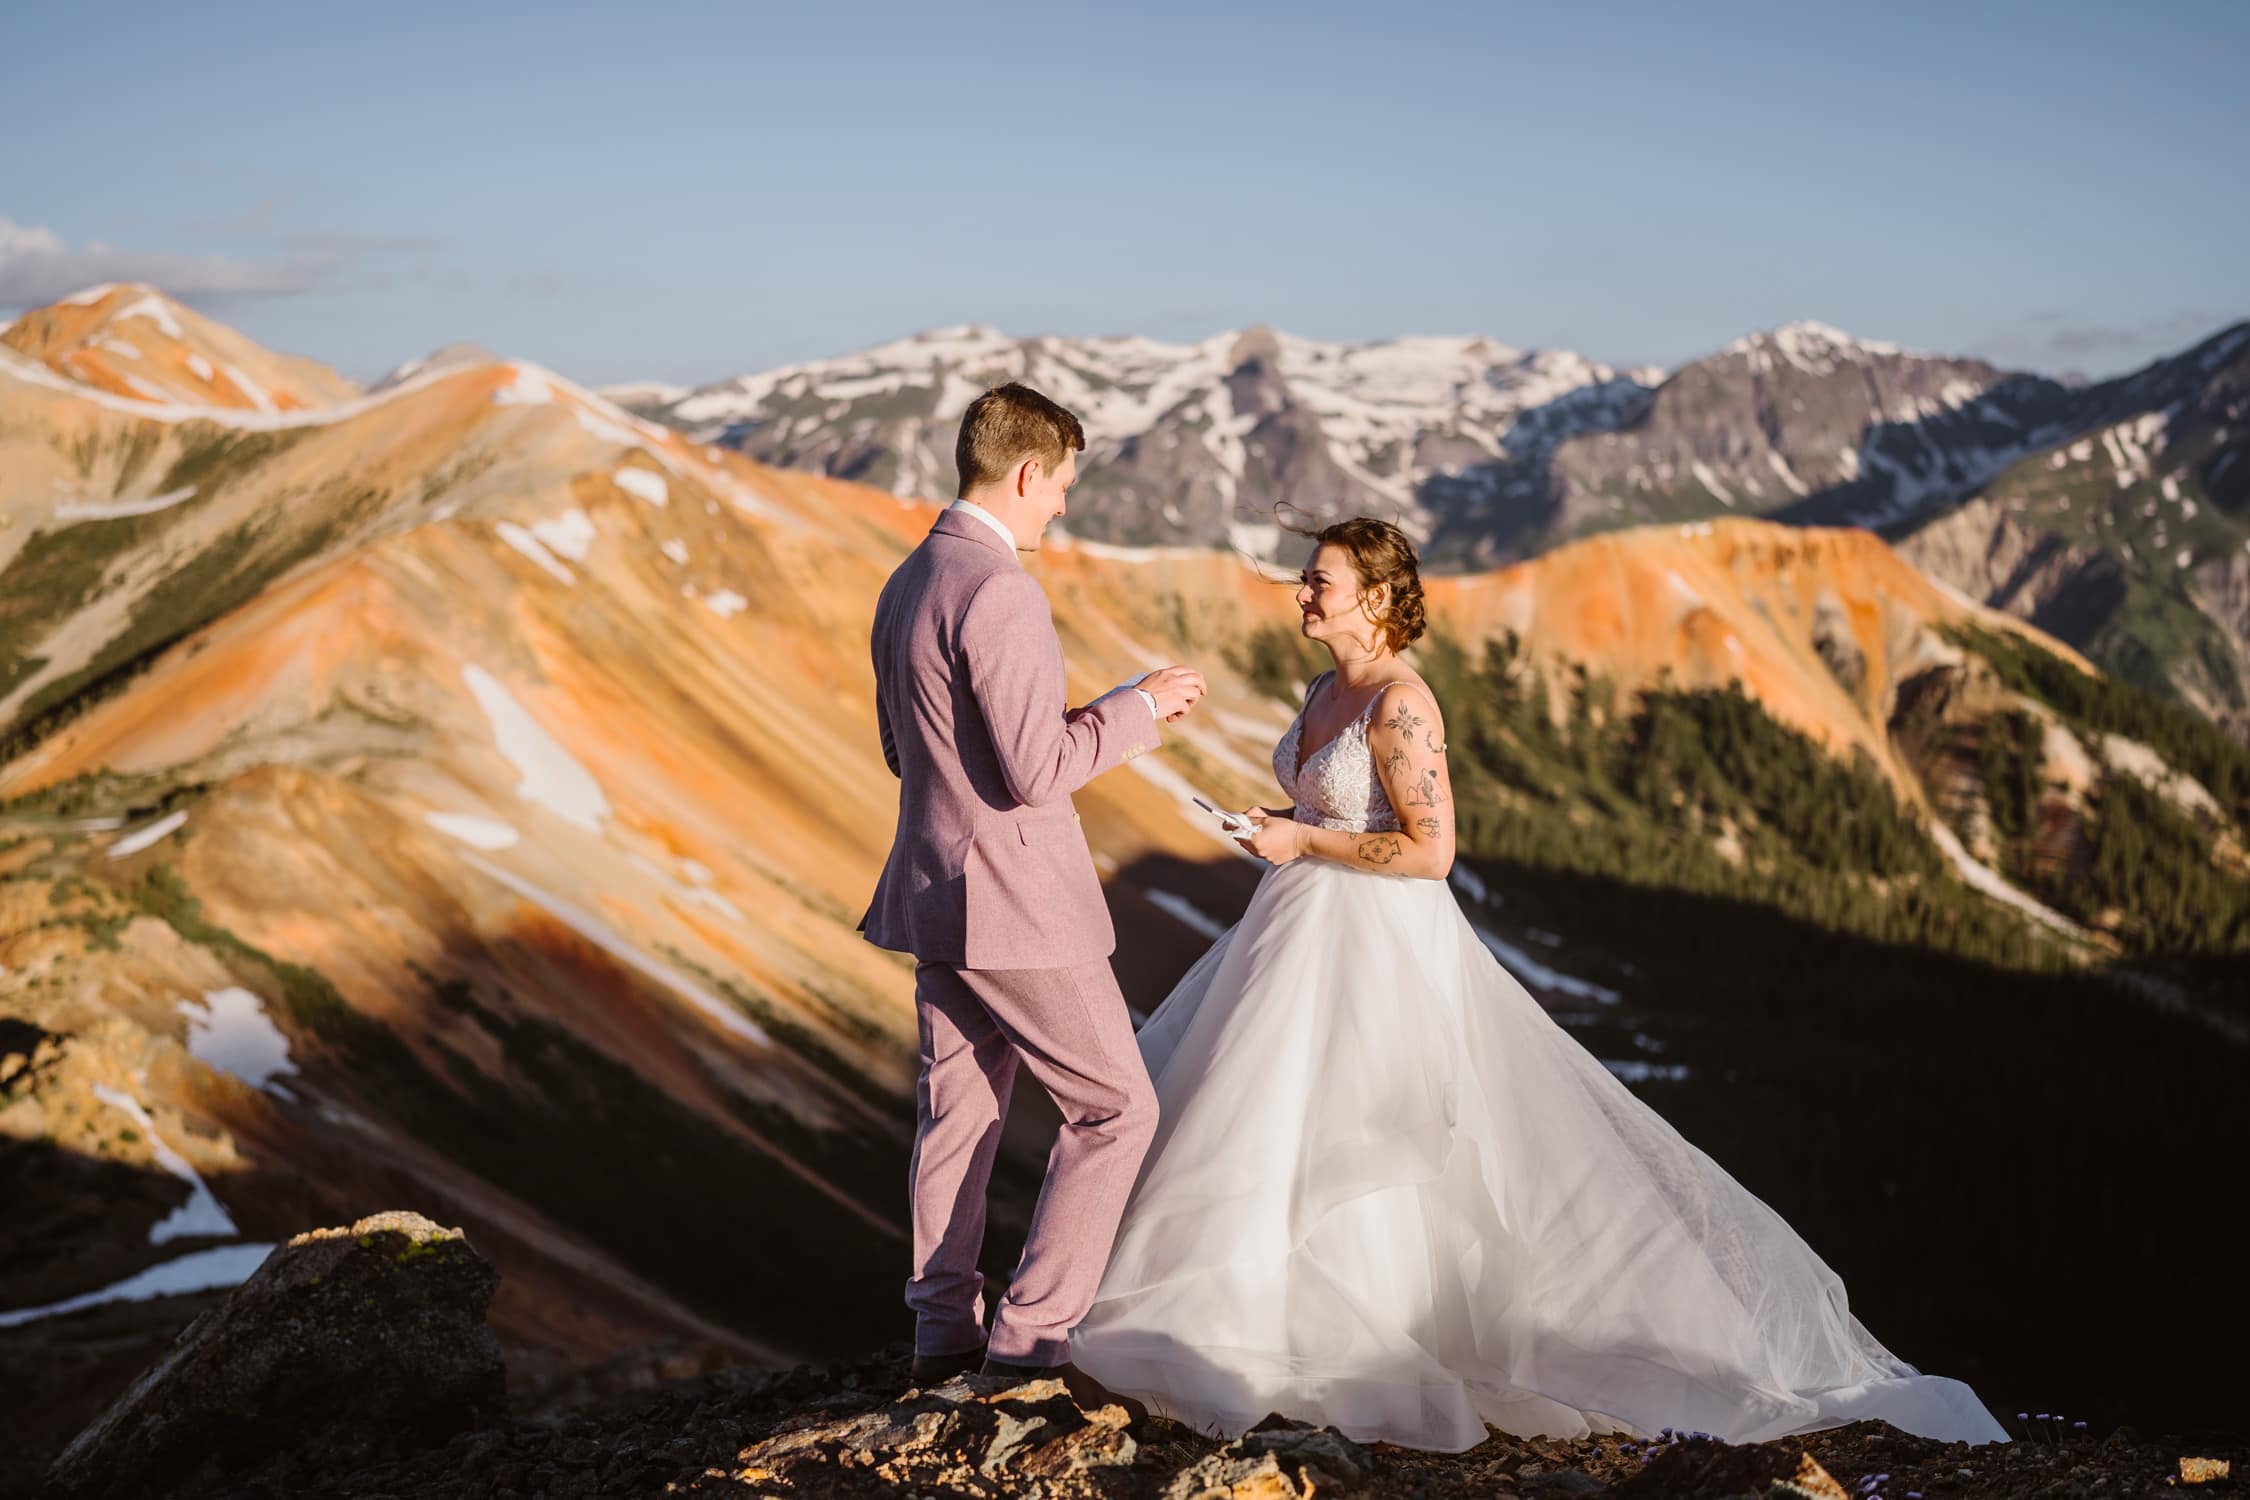 A couple sharing their vows in the San Juan mountains.